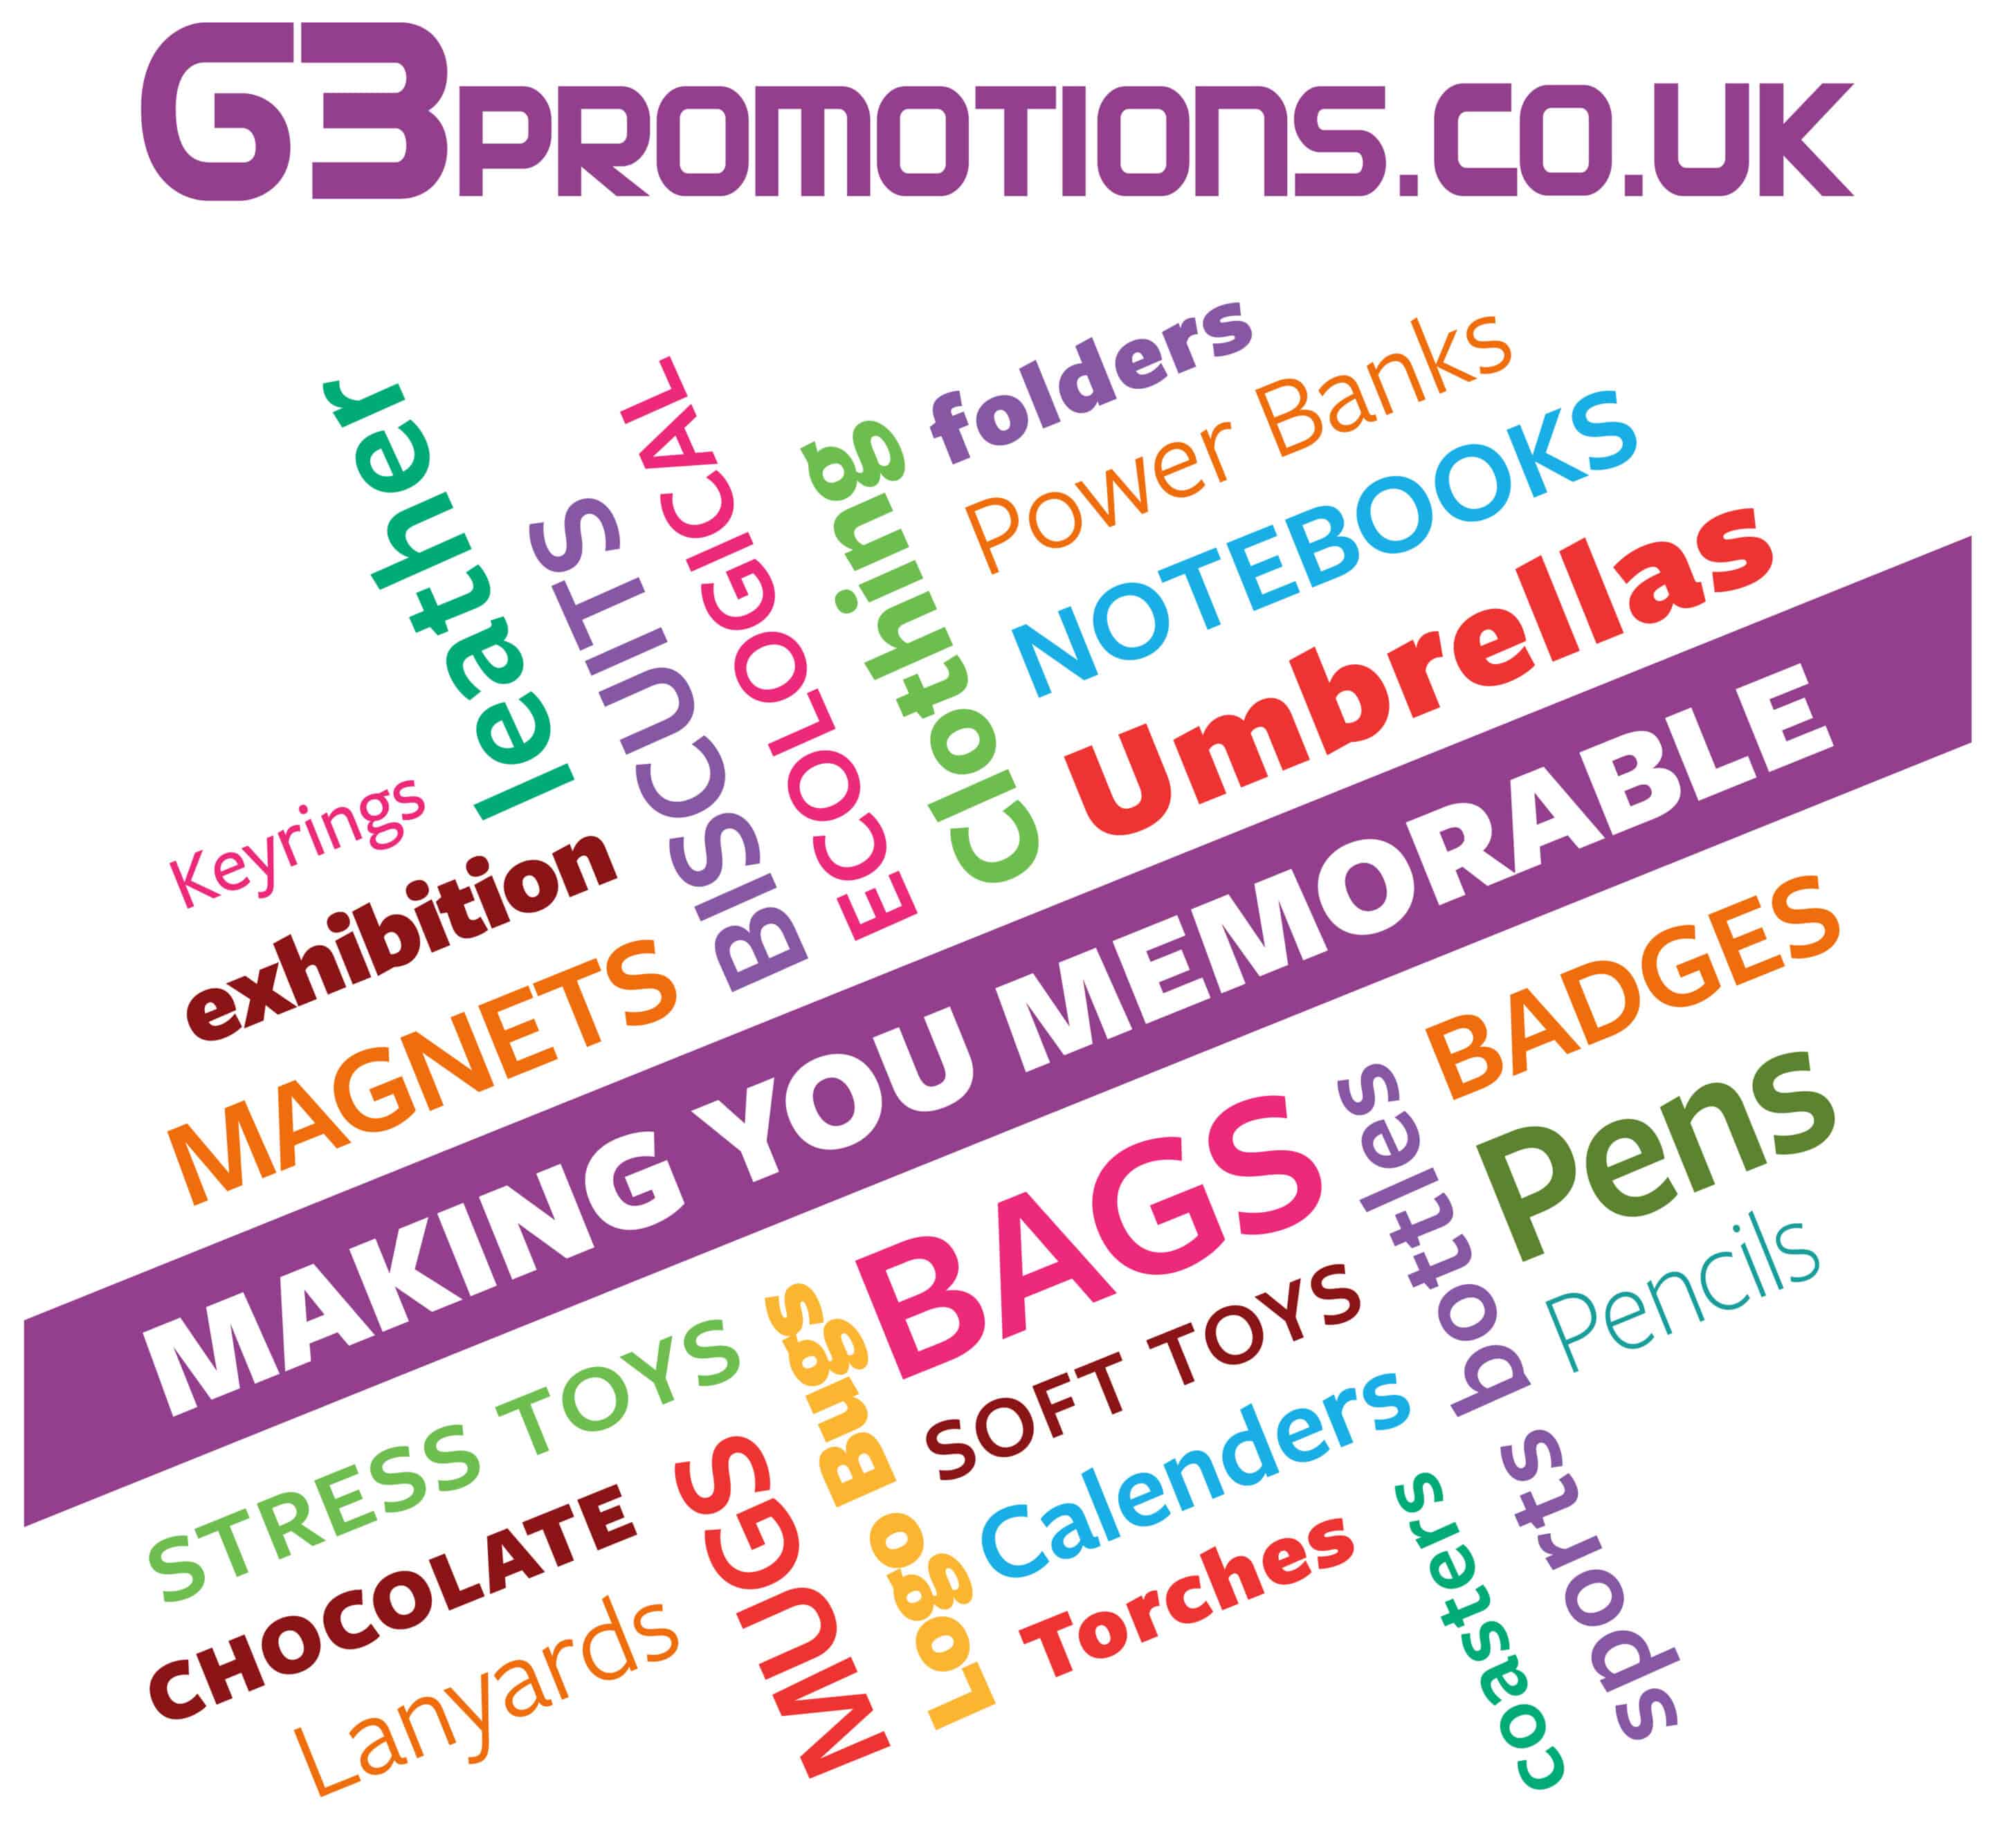 Word cloud in multiple colours featuring promo merchandise items. Title G3 PROMOTIONS.CO.UK Banner: MAKING YOU MEMORABLE